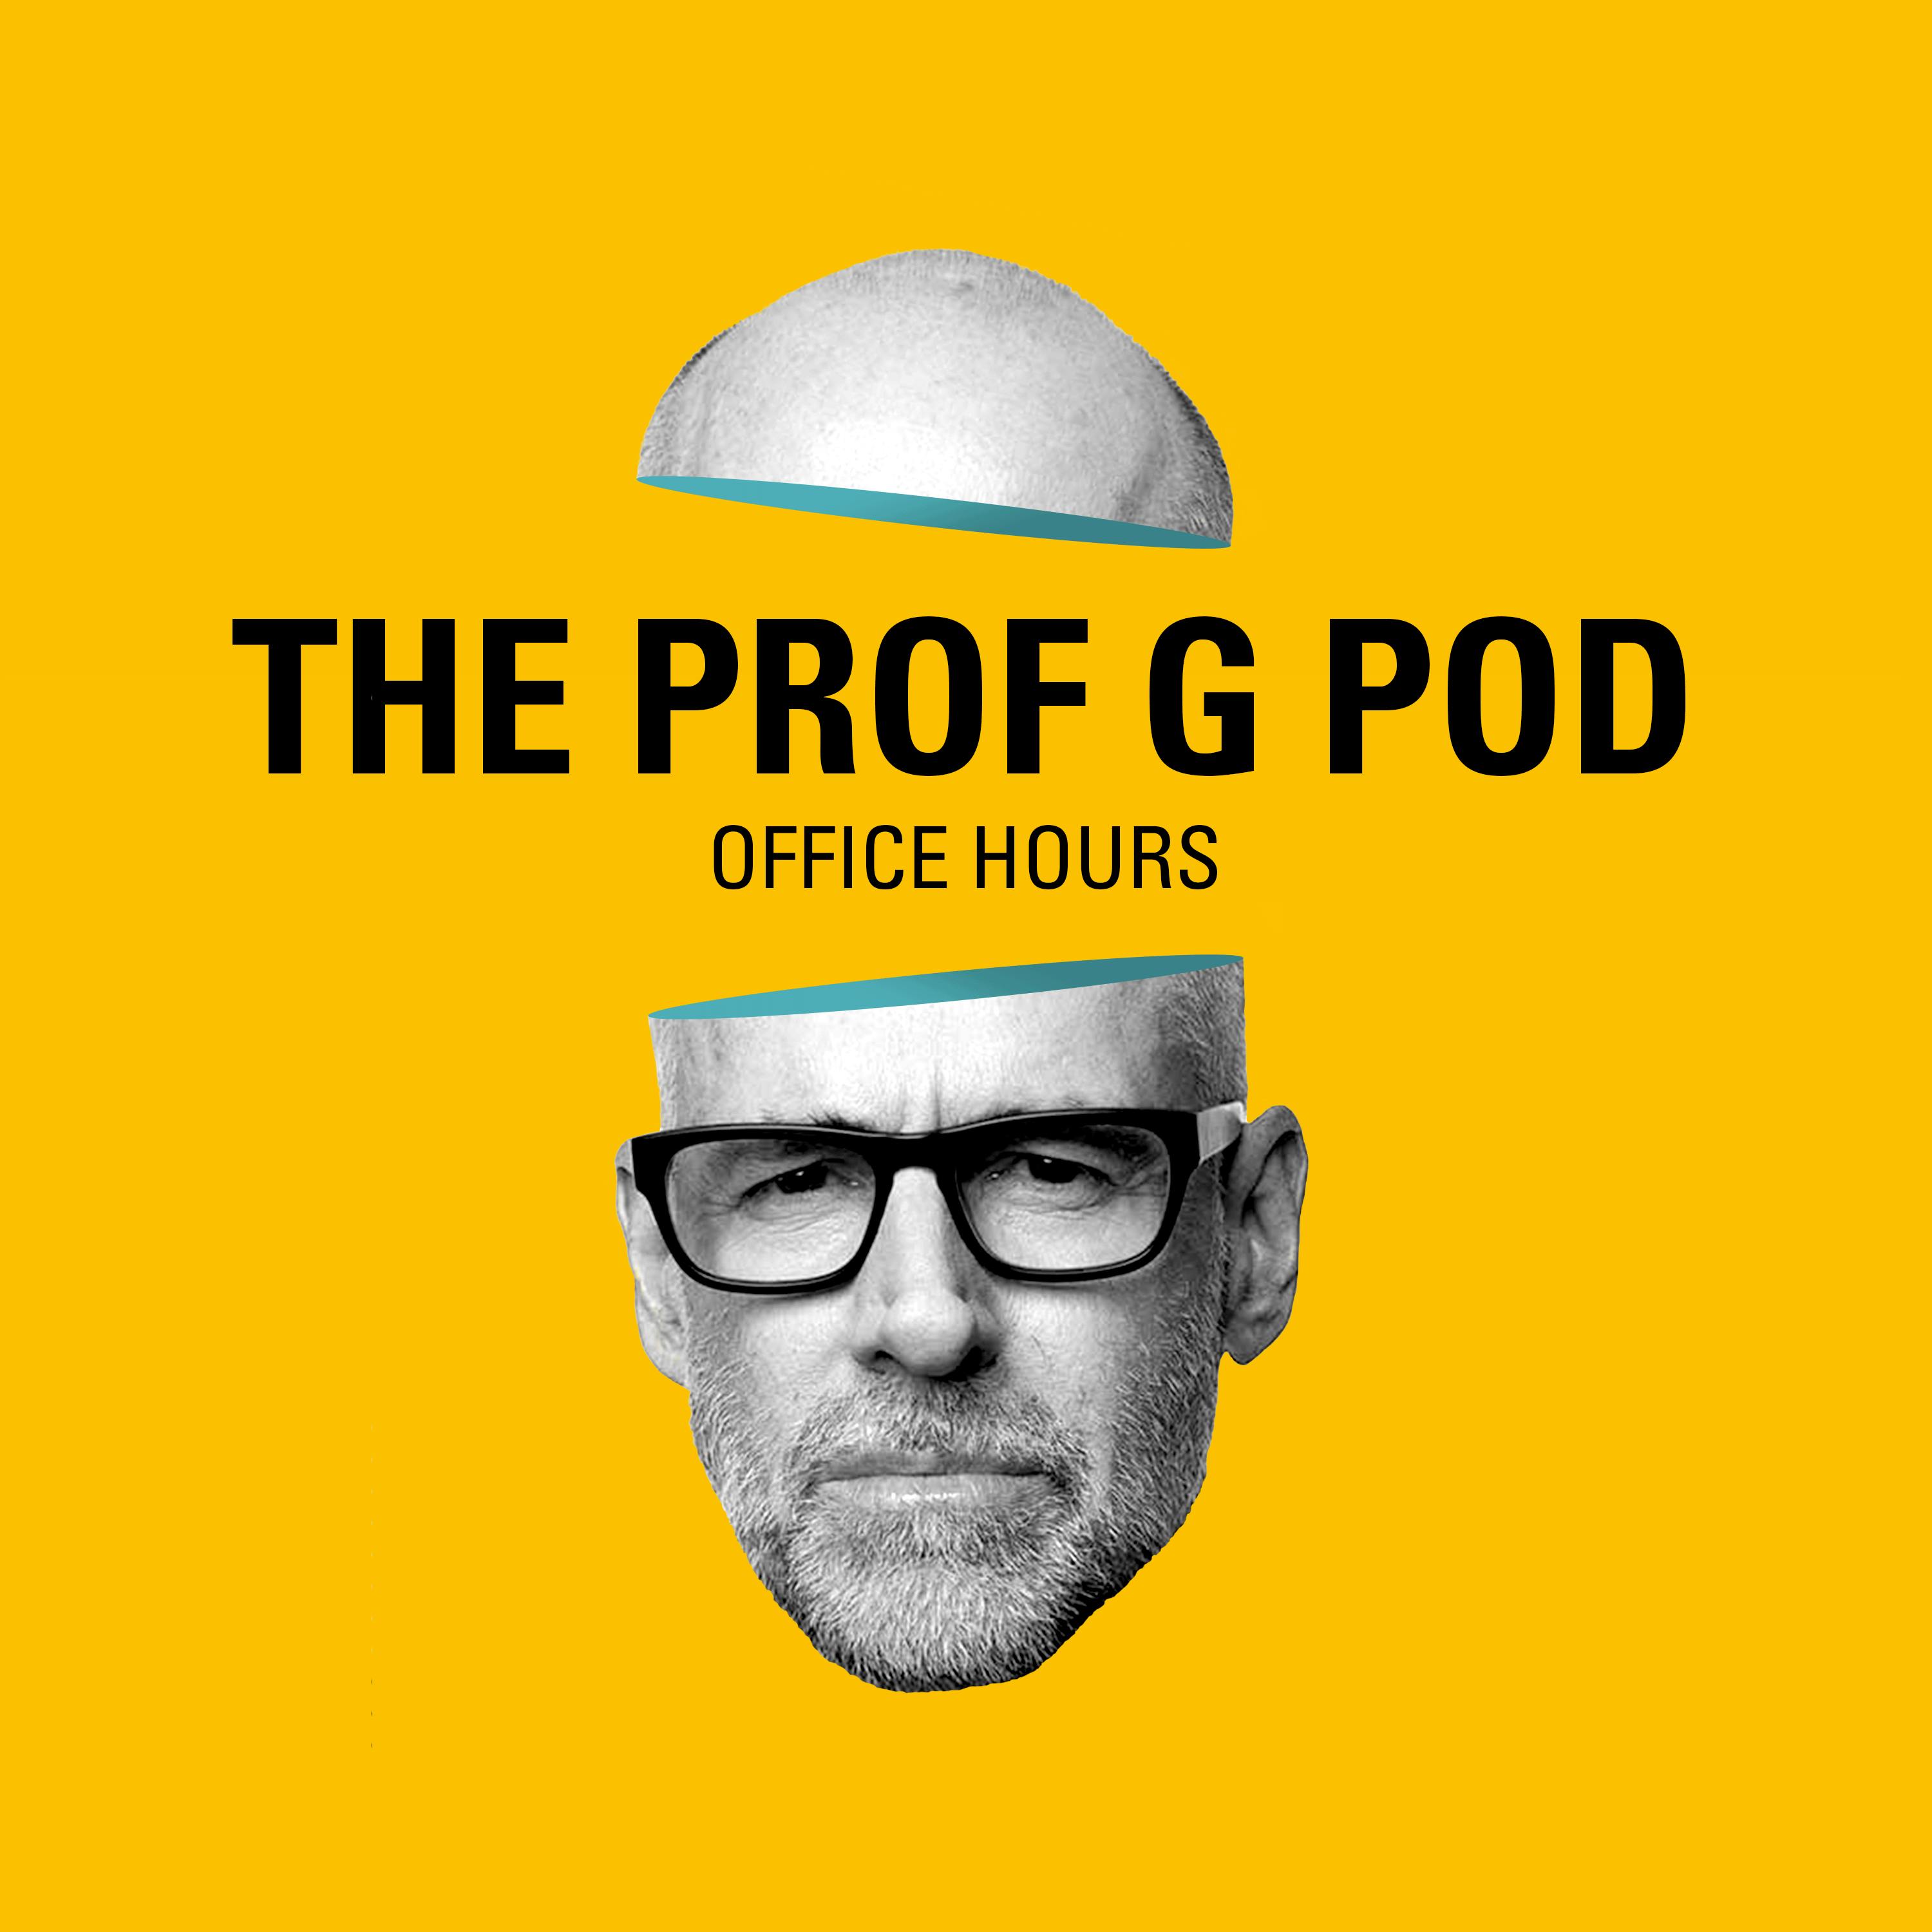 Office Hours: Allocating Your Small Business’s Revenue, Would Scott Ever Run for Public Office? and Finding Your Purpose by Vox Media Podcast Network